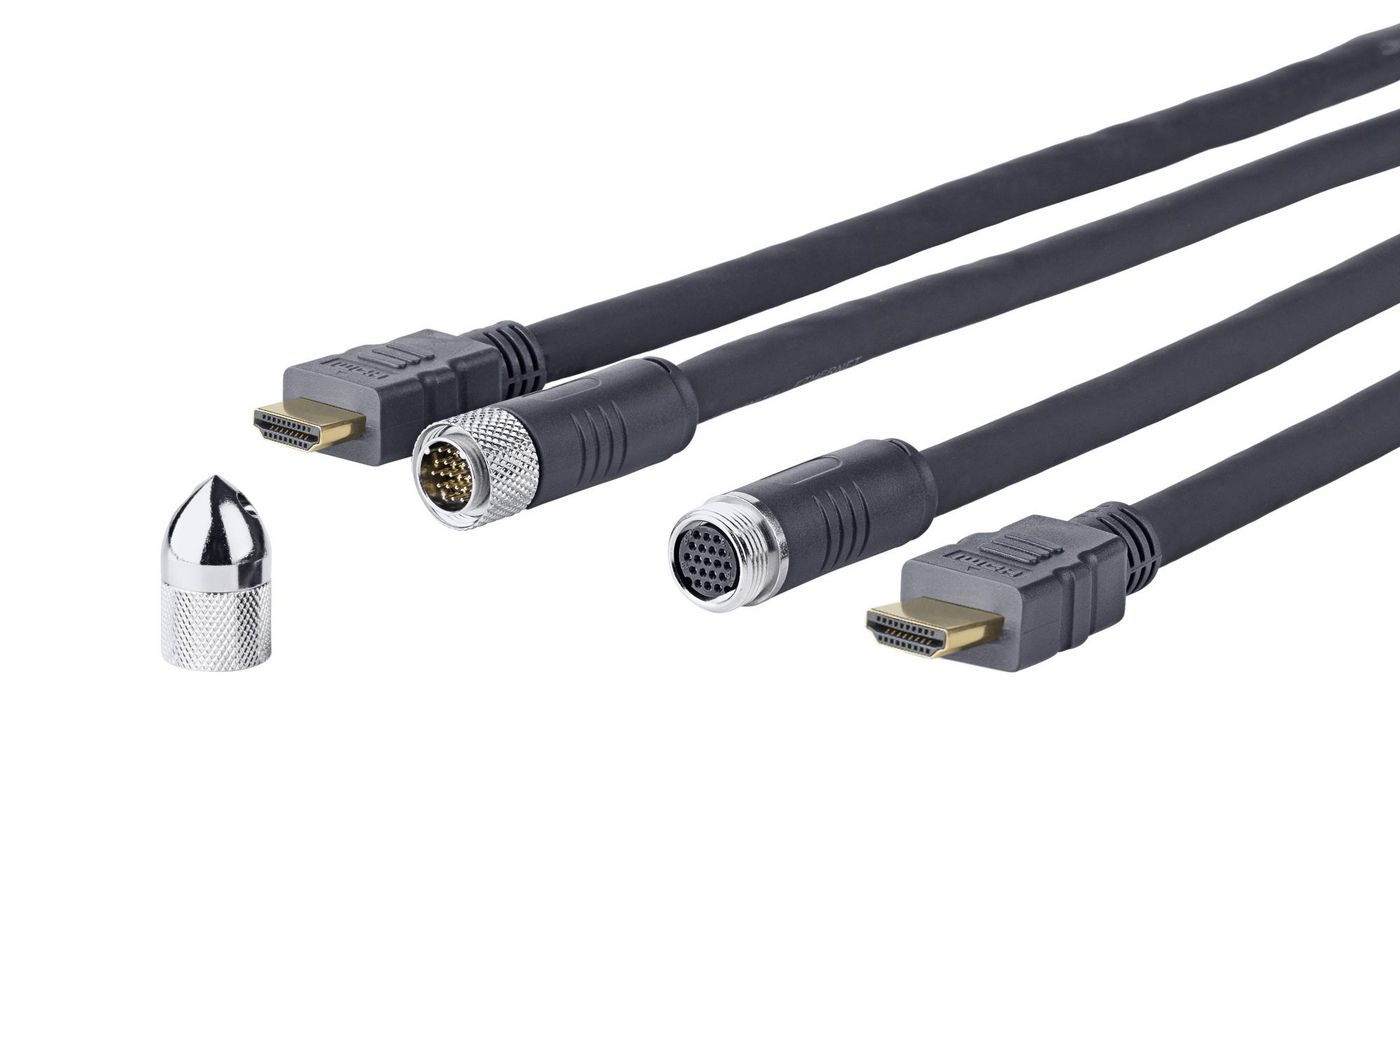 PRO HDMI CROSS WALL CABLE